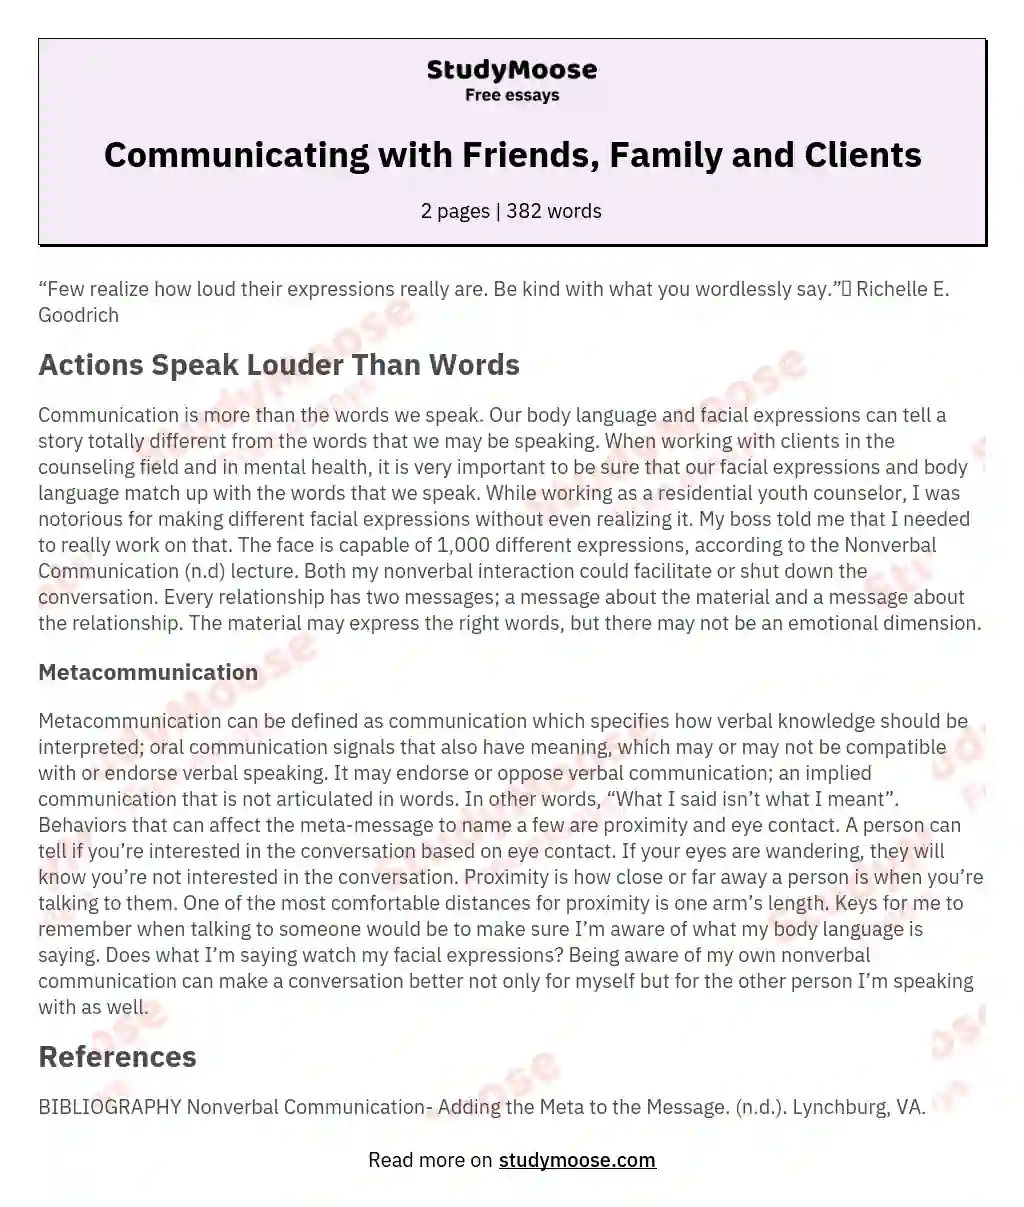 Communicating with Friends, Family and Clients essay